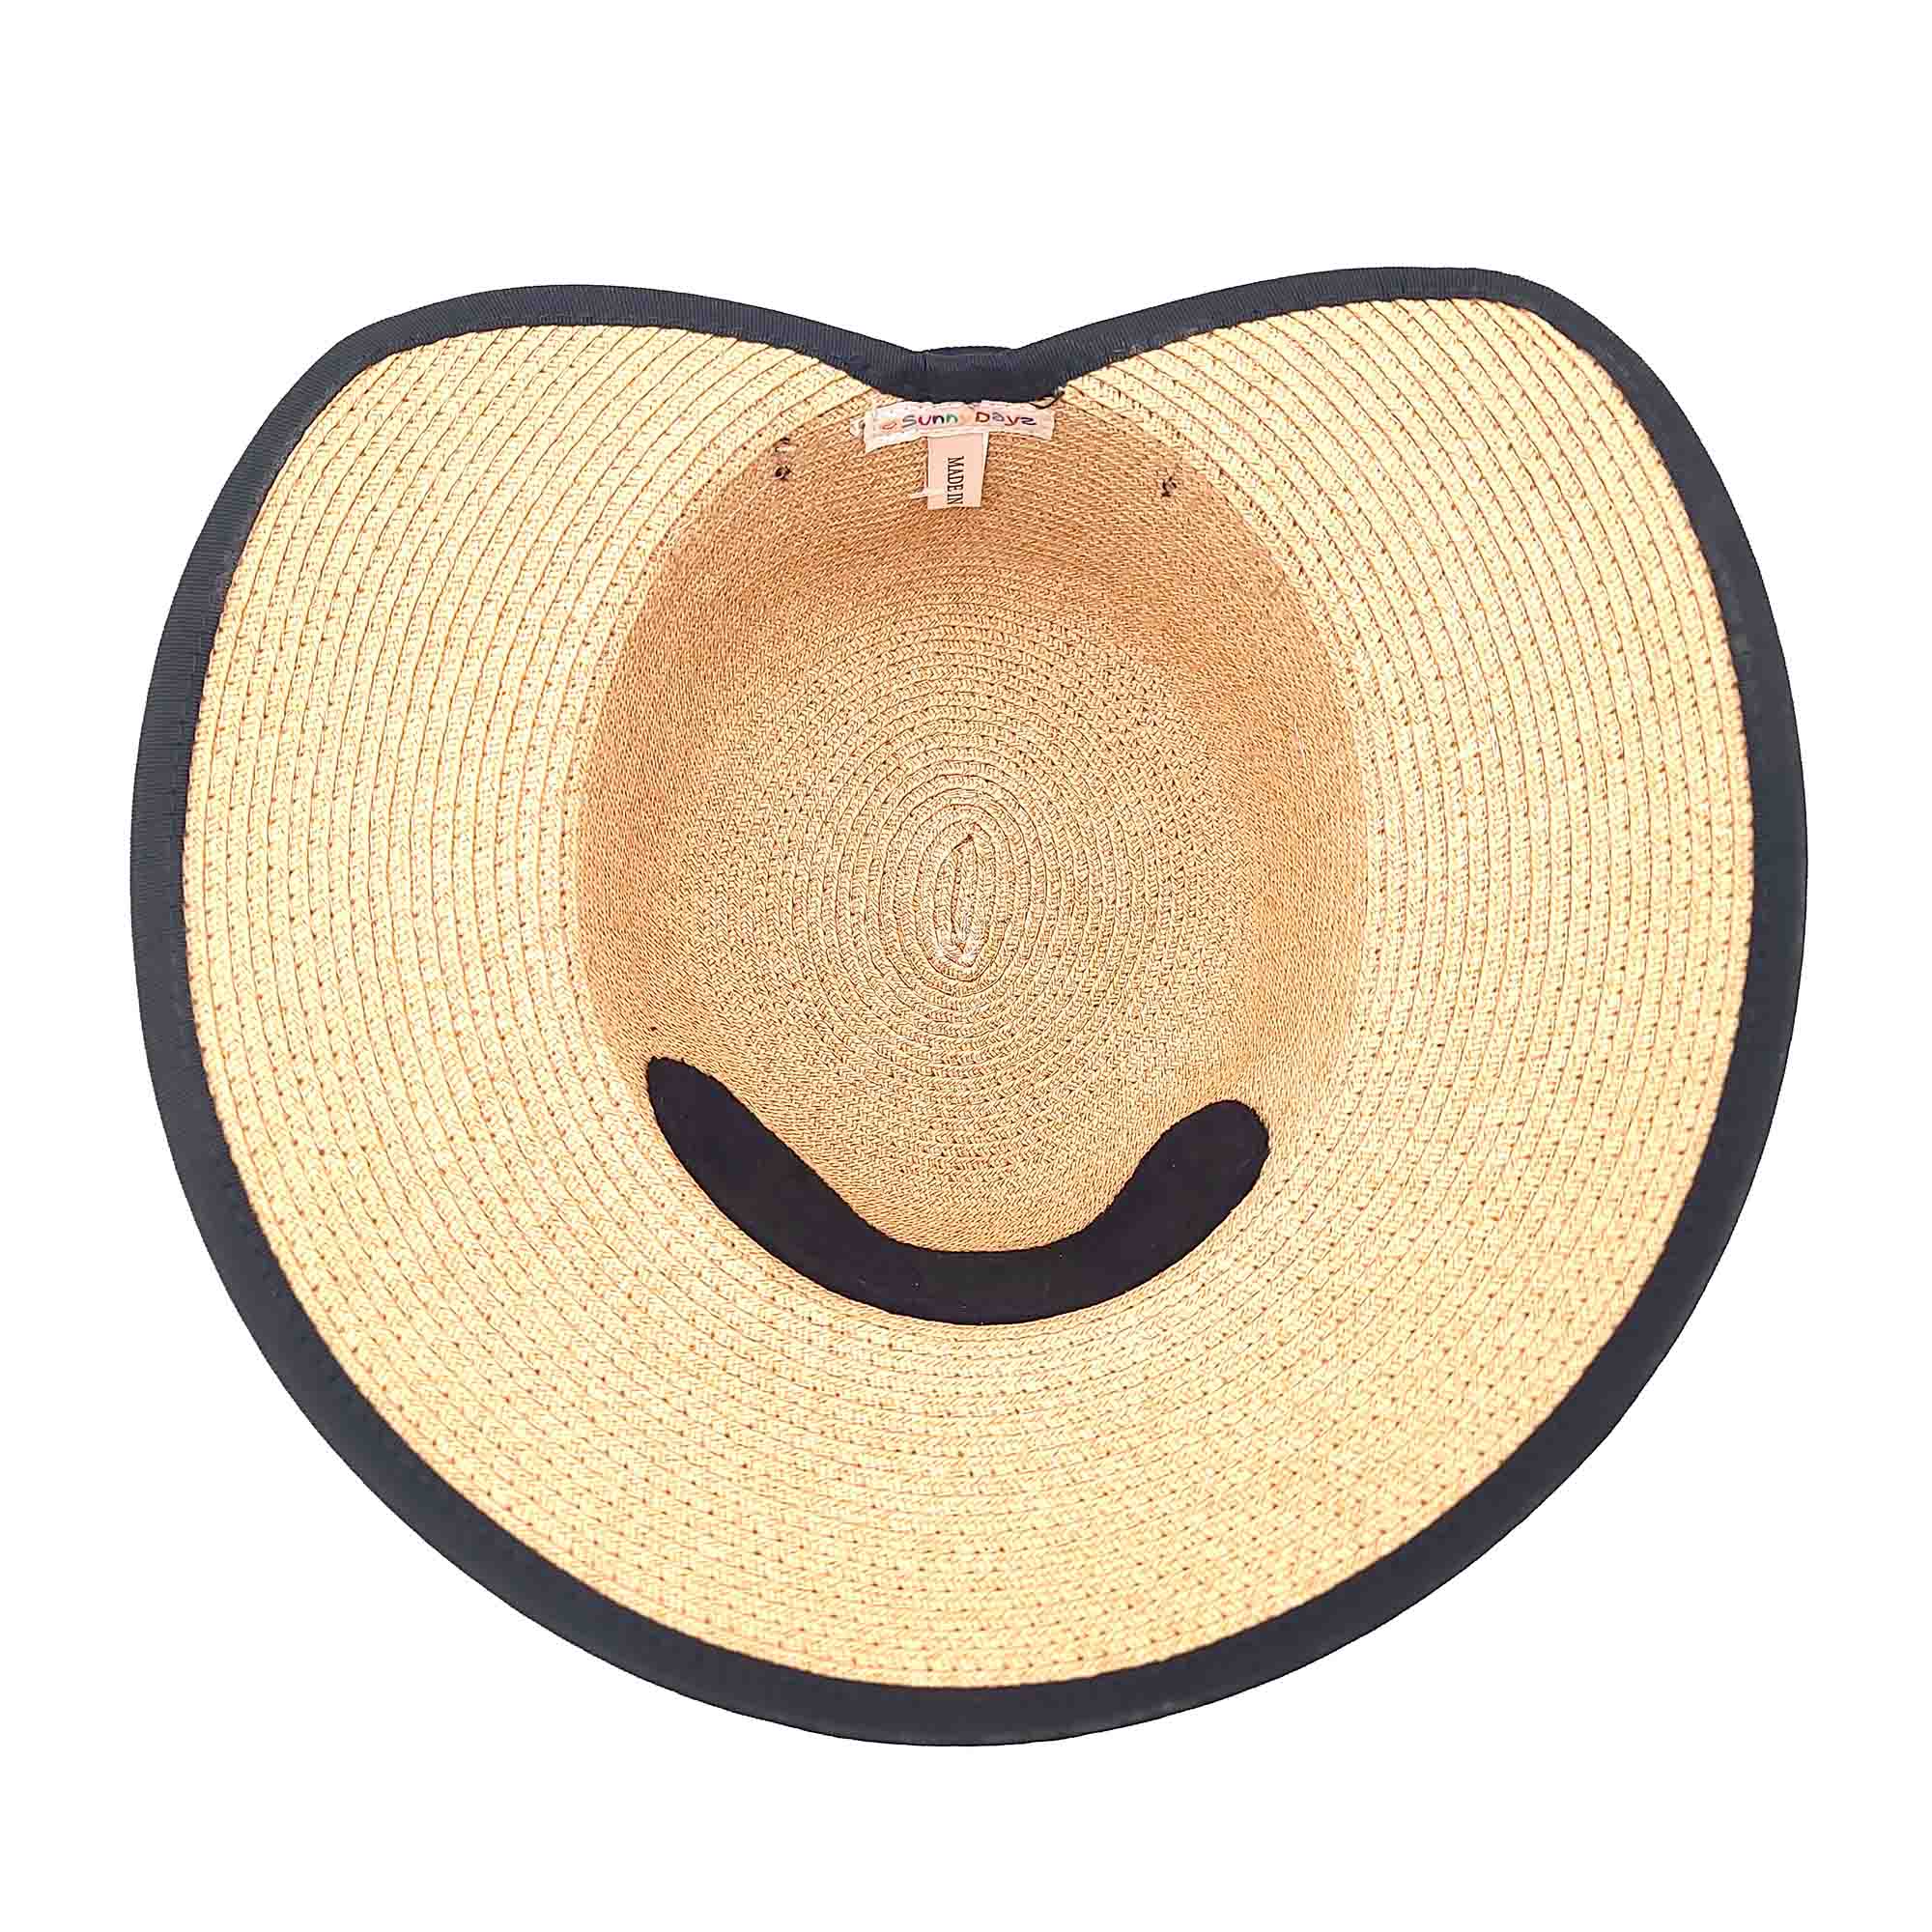 Petite Backless Facesaver Hat for Small Heads - Sunny Dayz™ Hats Facesaver Hat Sun N Sand Hats    